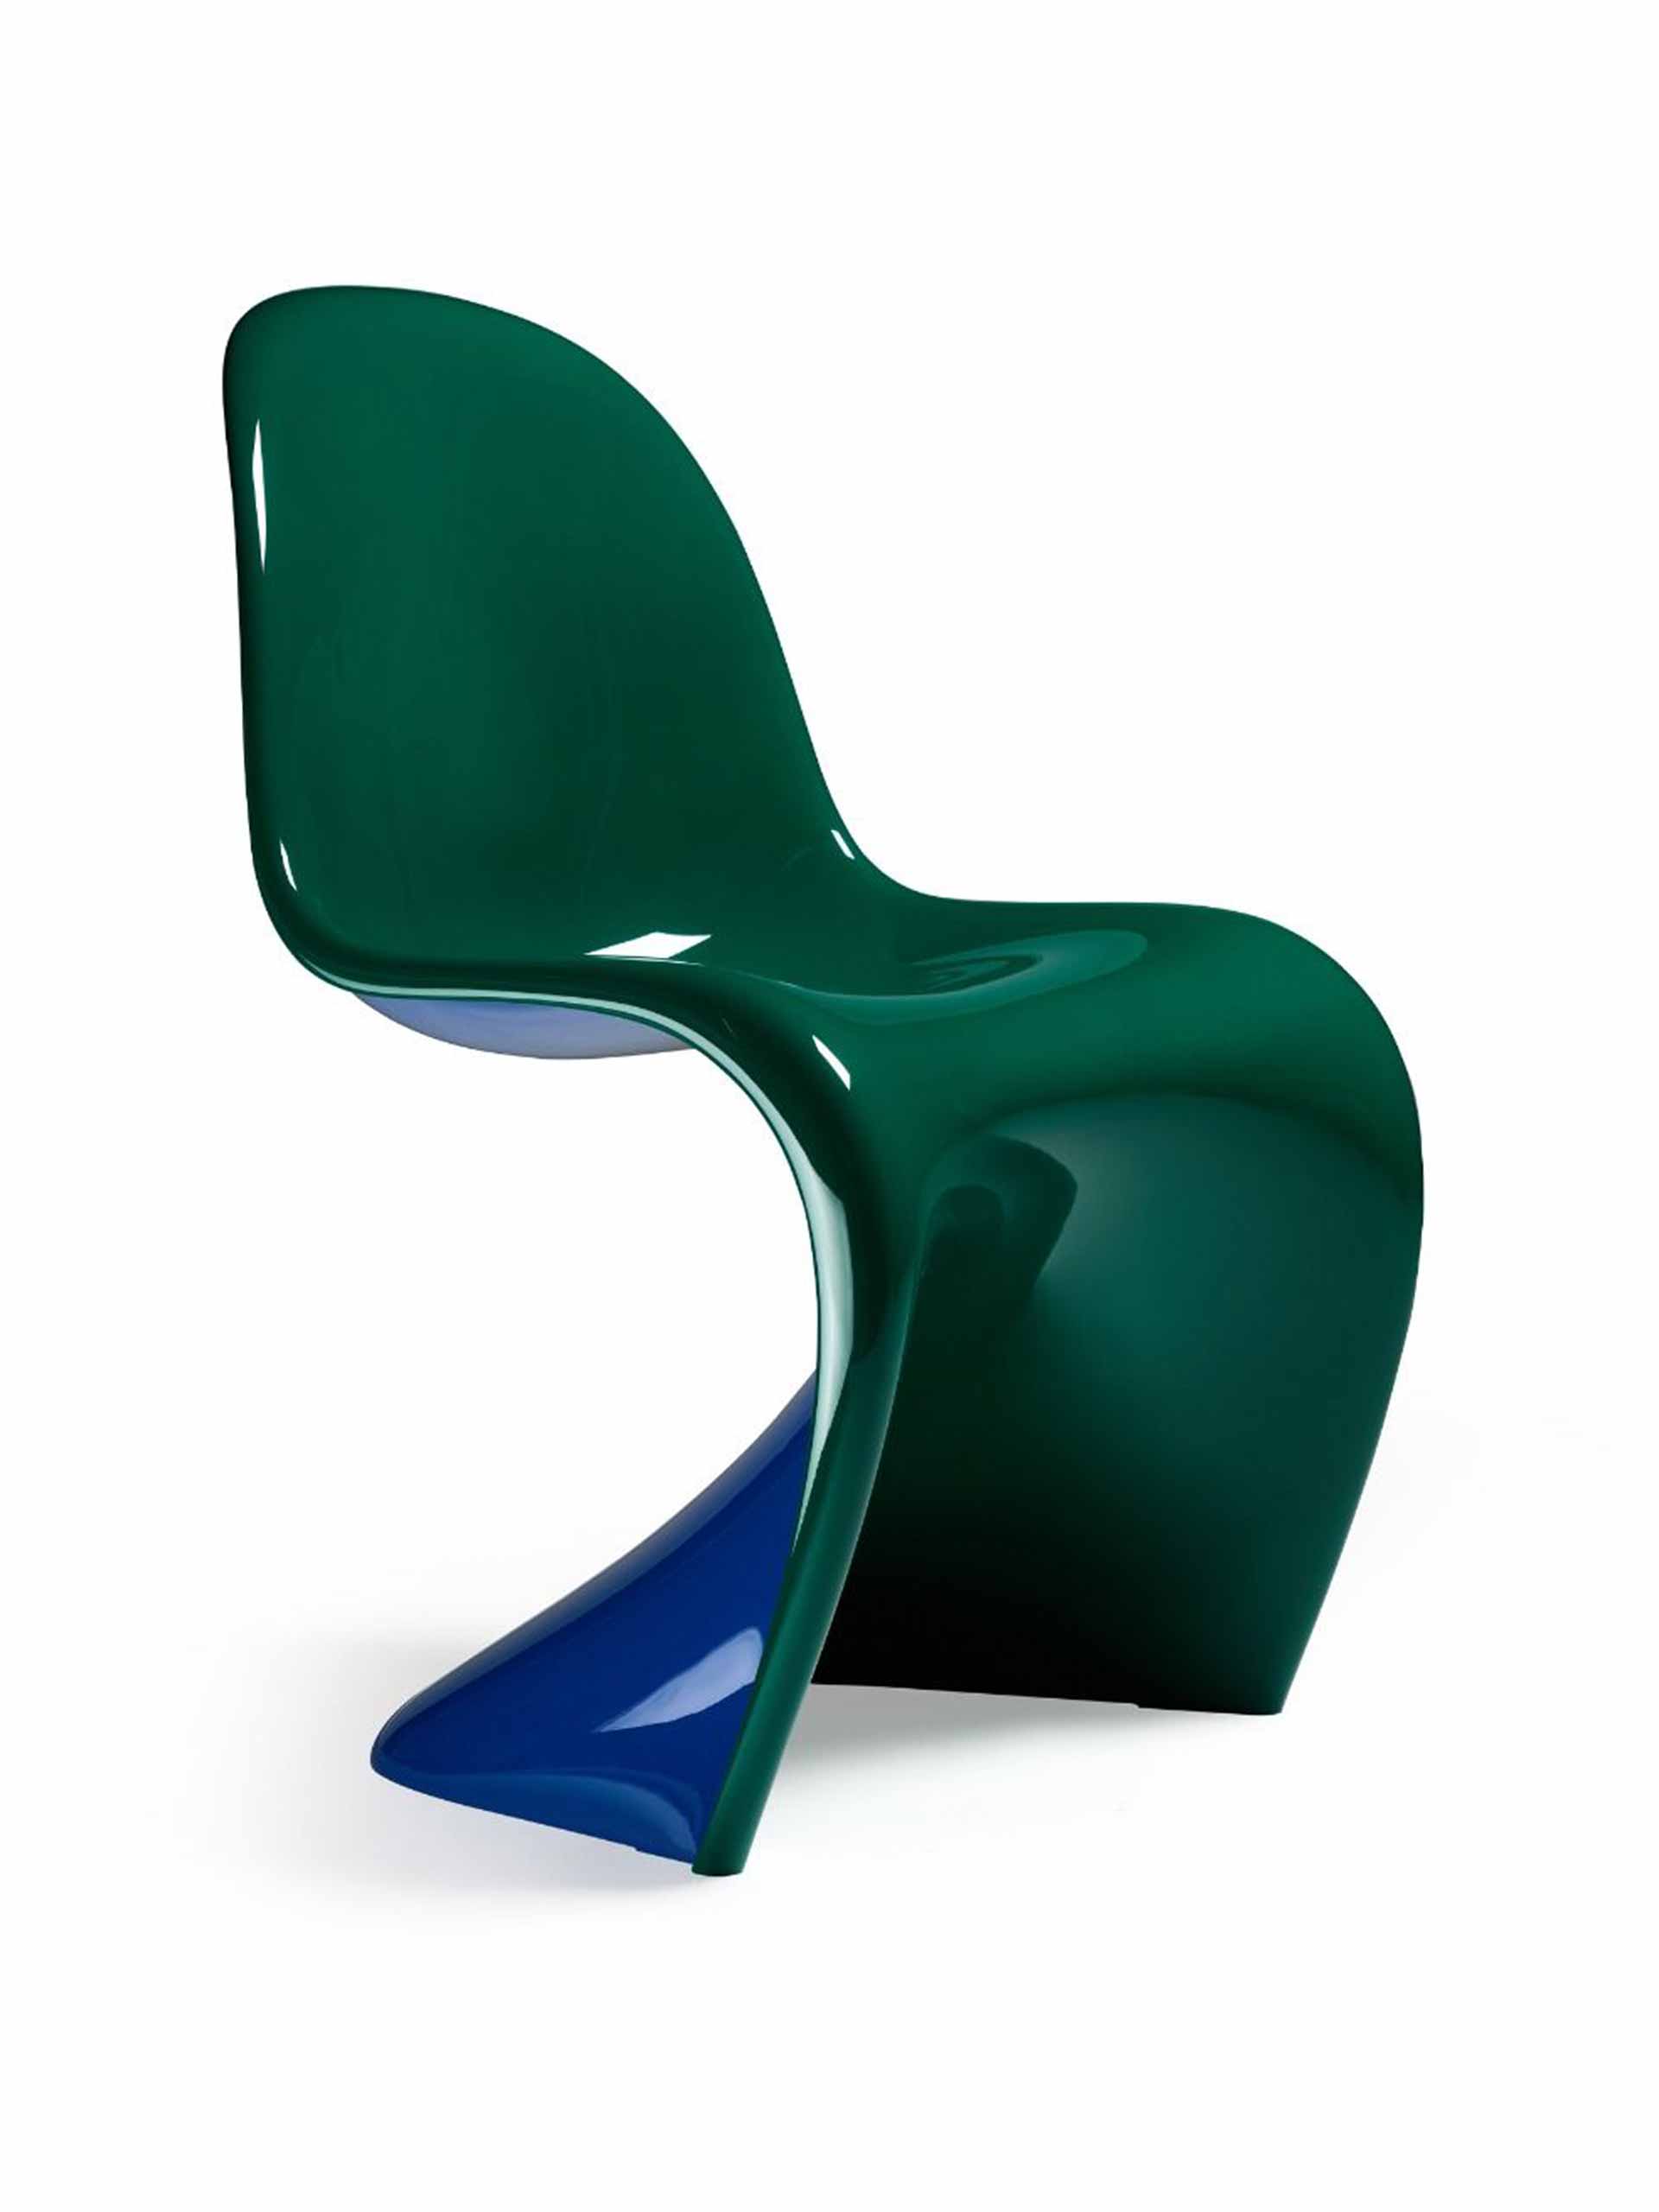 Green and blue chair